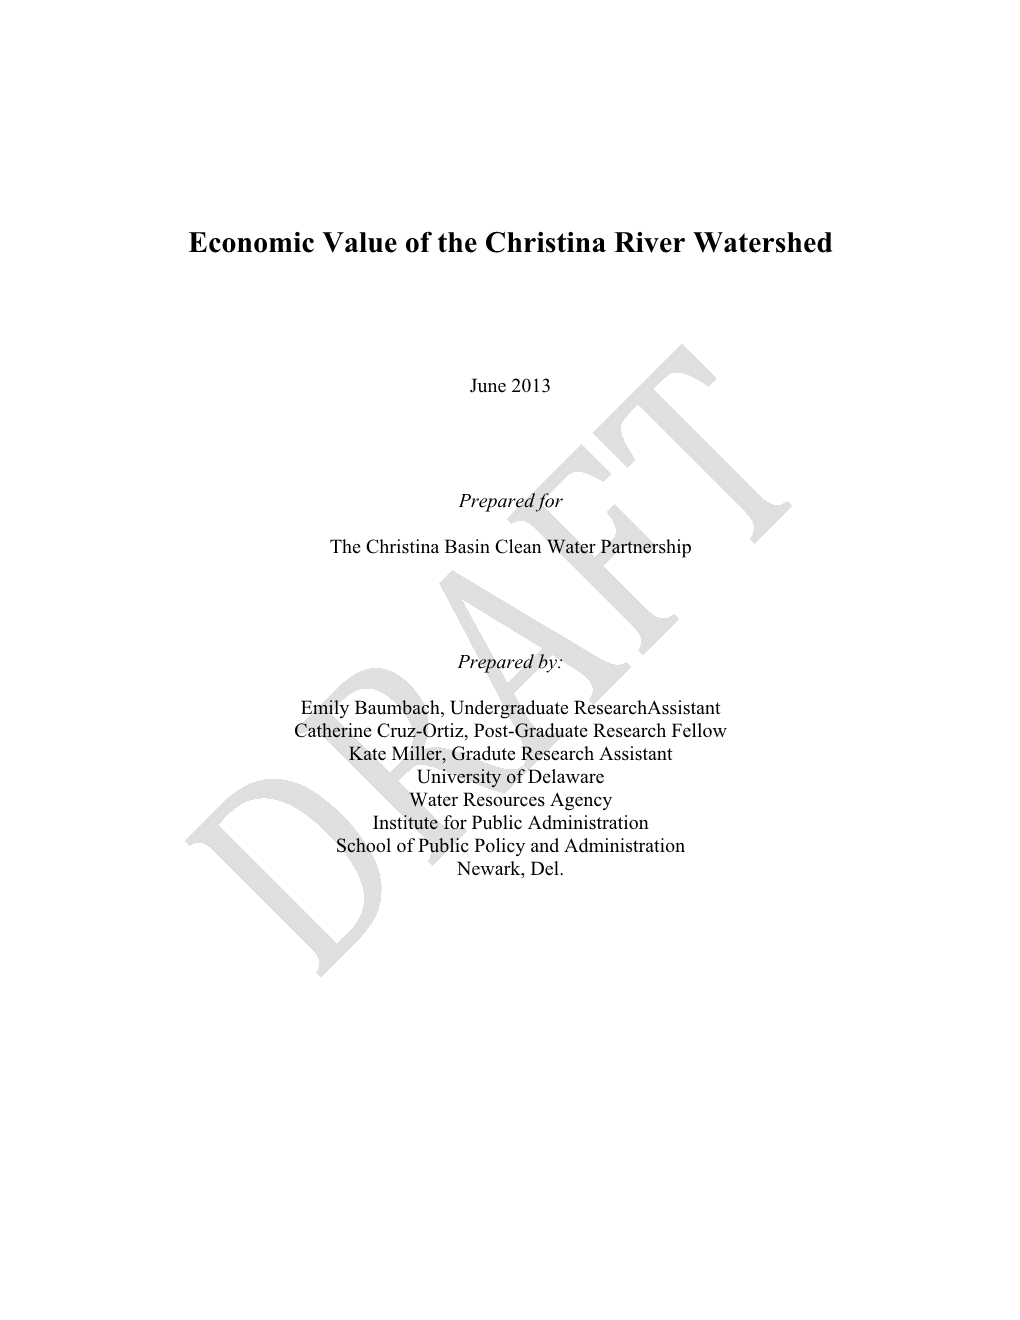 Economic Value of the Christina River Watershed